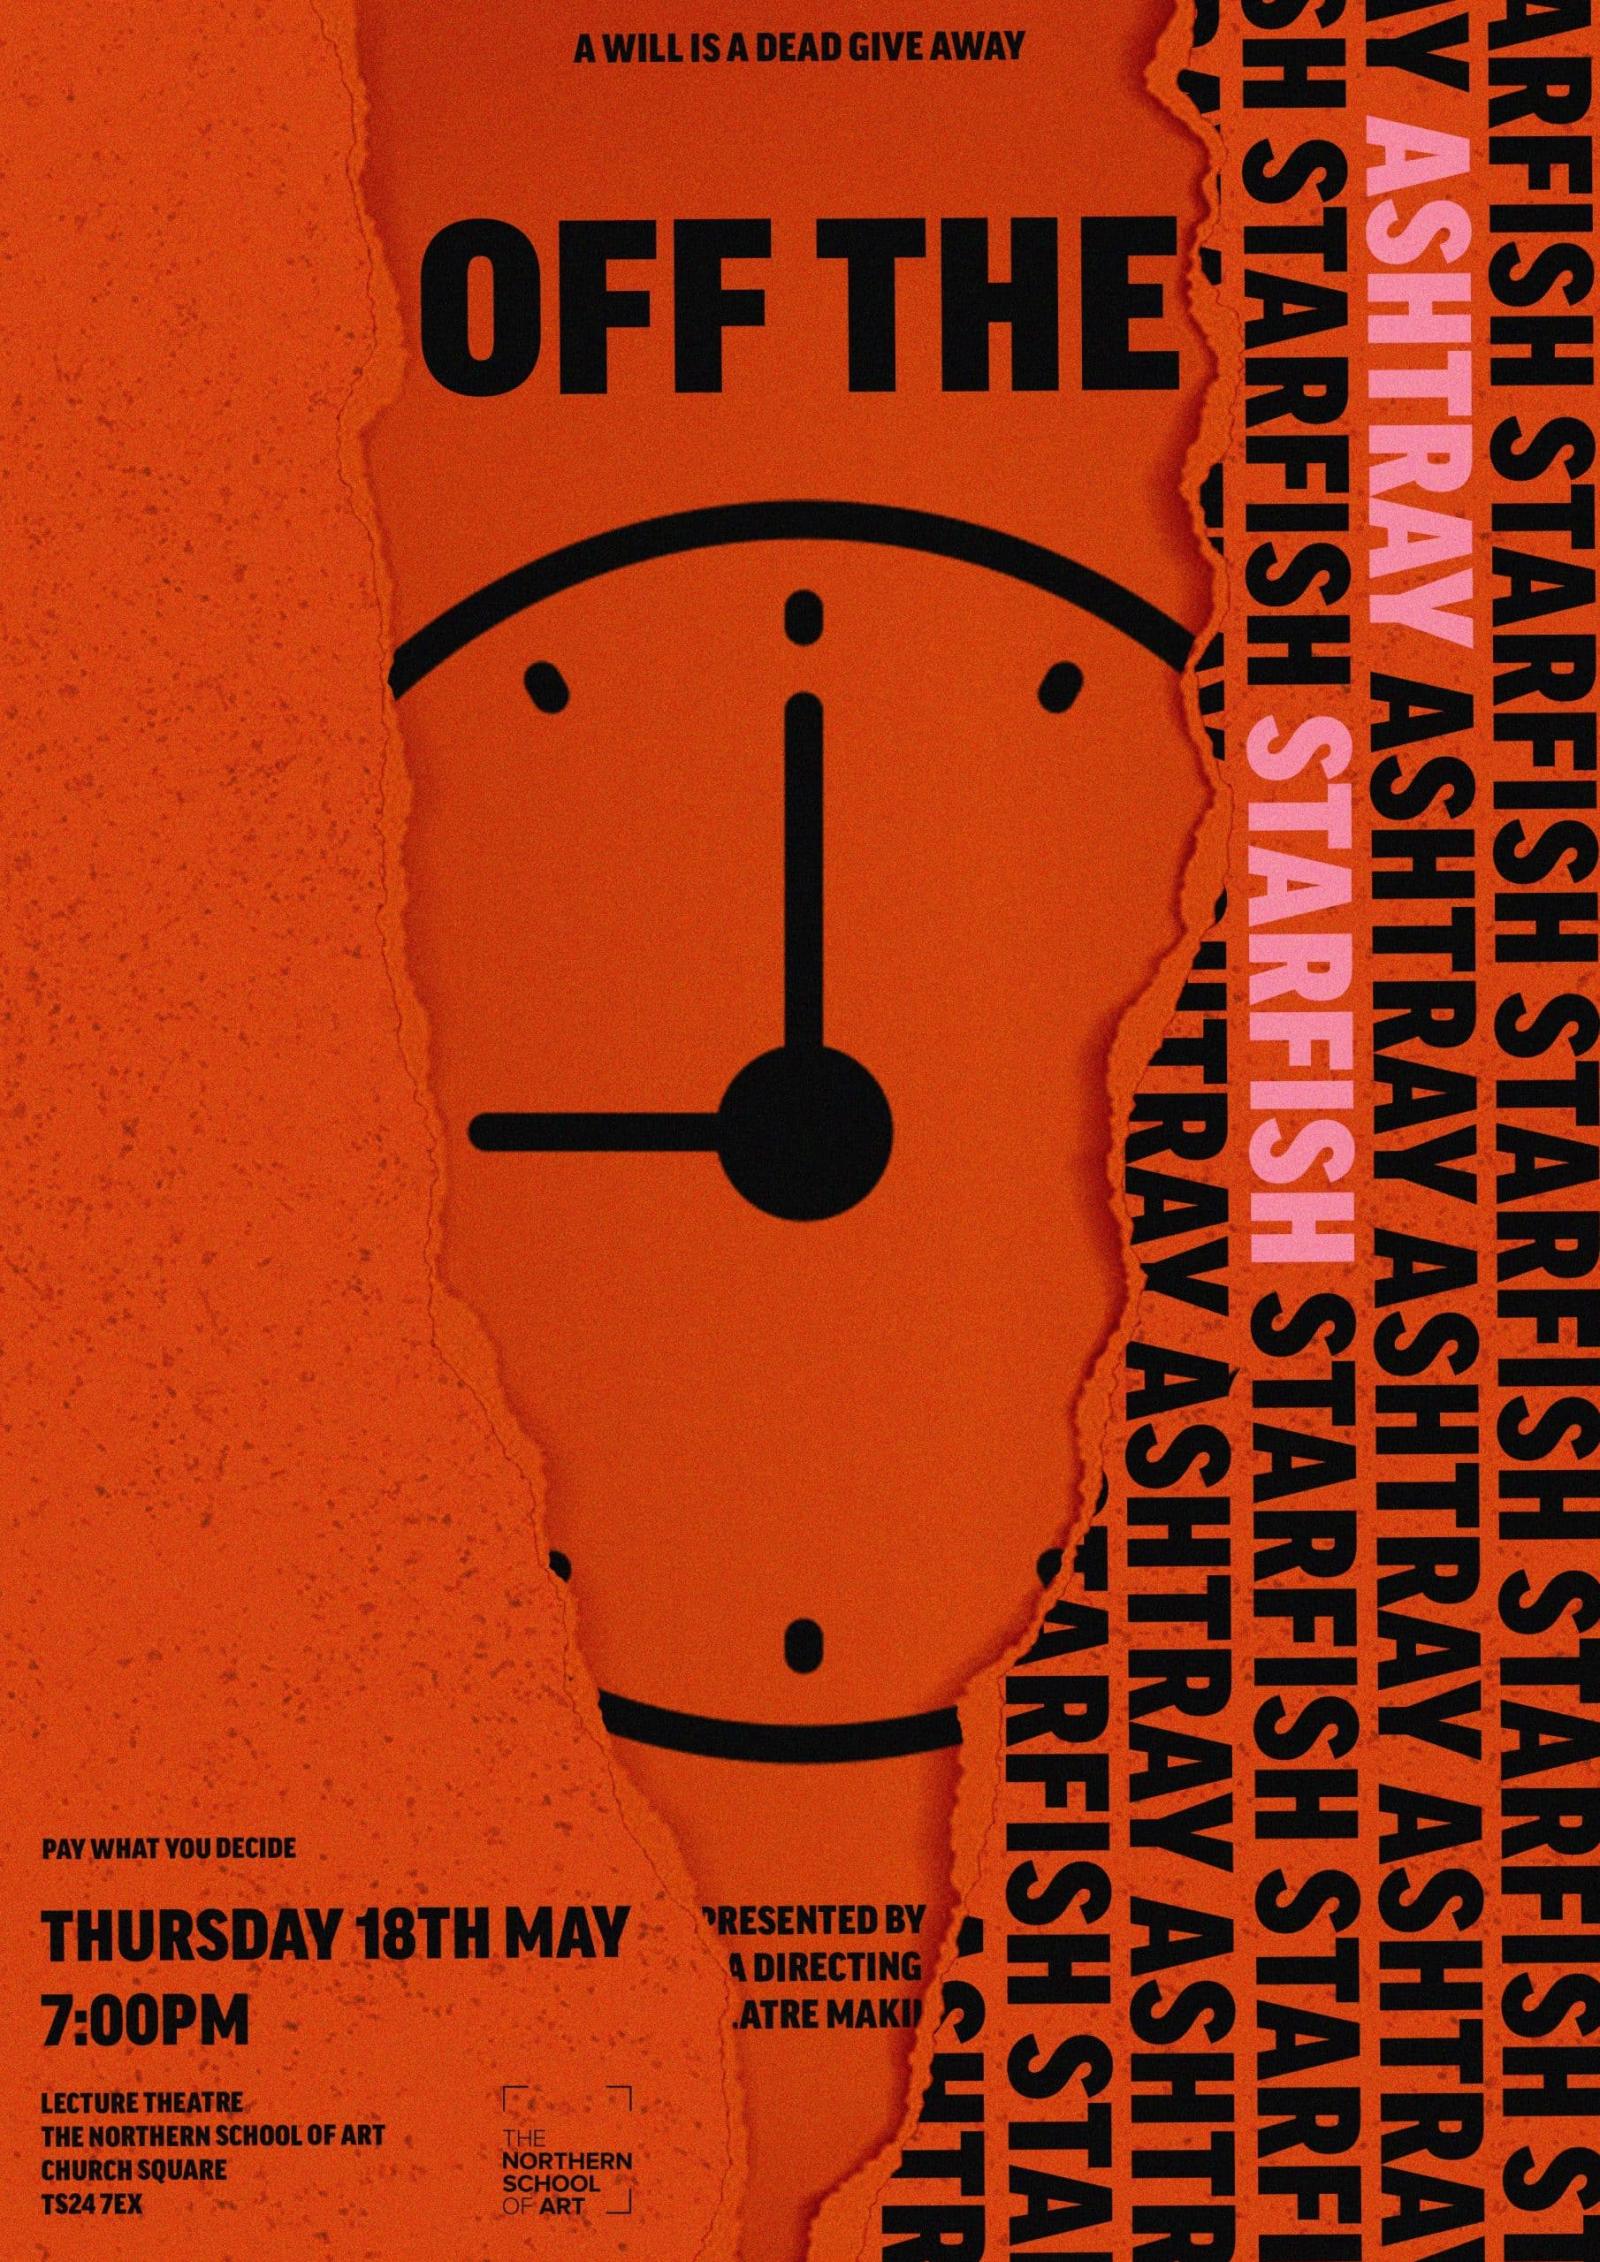 MA Directing and Theatre Making present<br>  Off the Clock<br>  18th May 7pm <br>The Northern School of Art Theatre